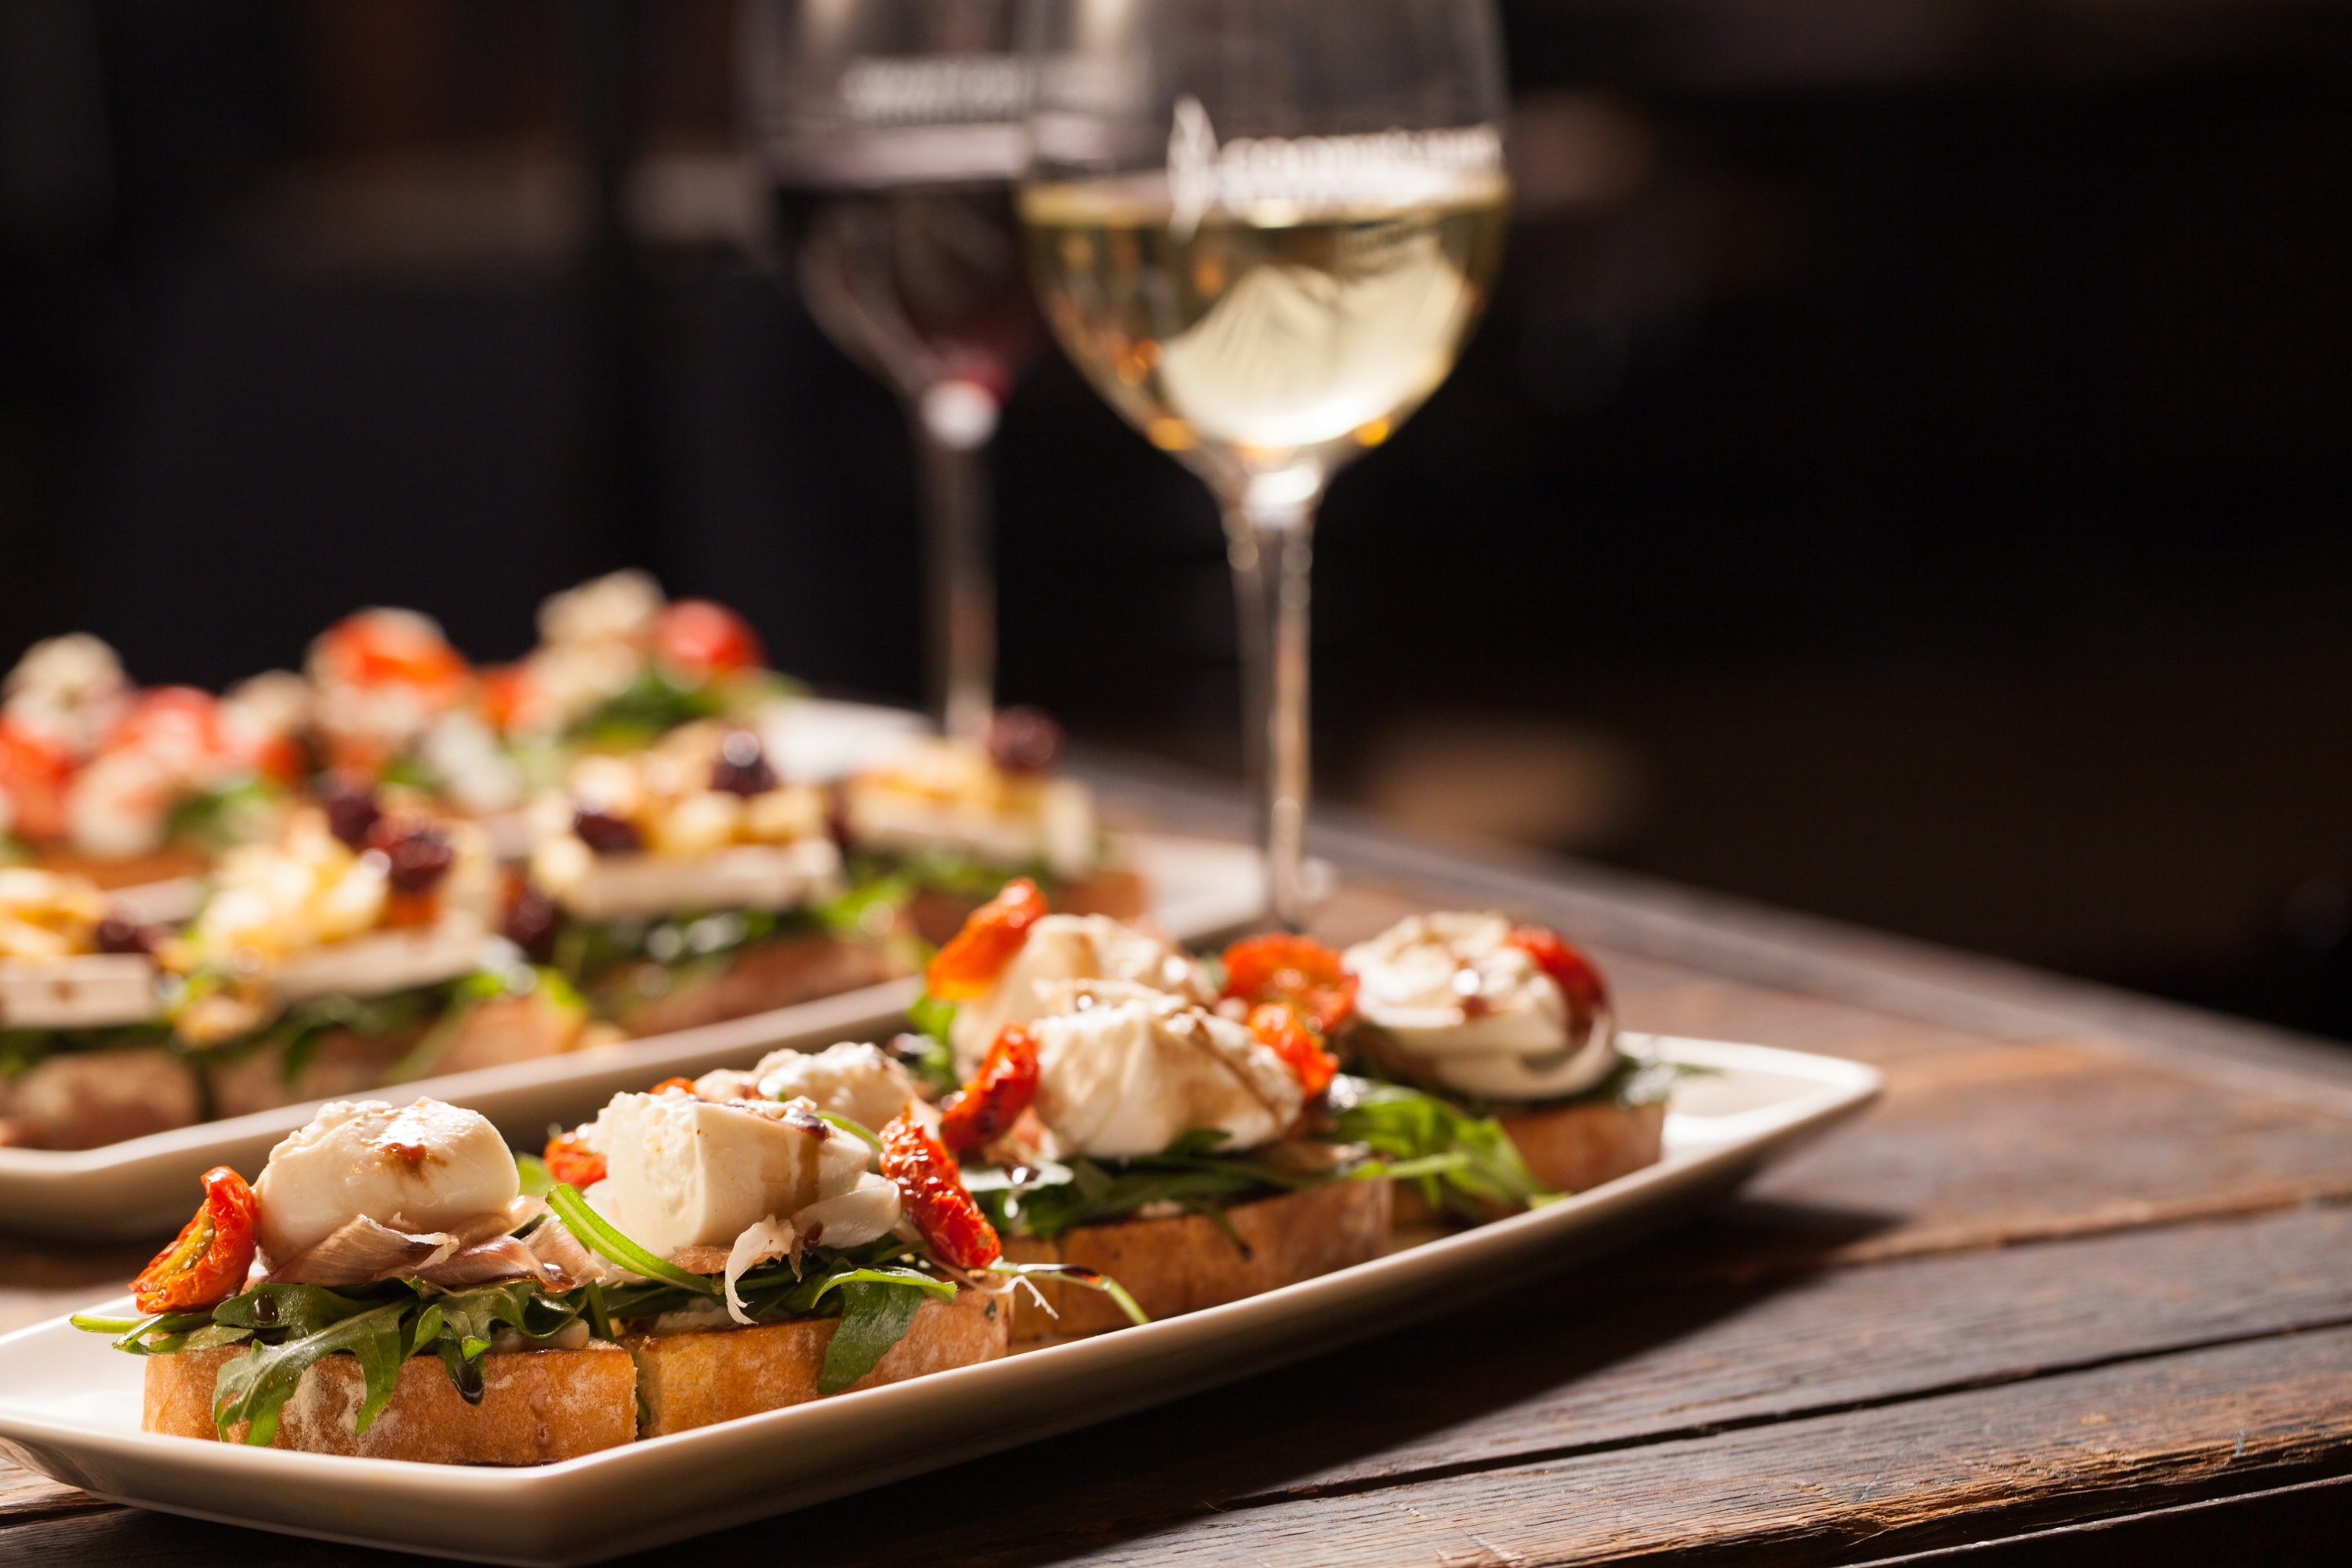 Upclose image of appetizer and wine glasses 